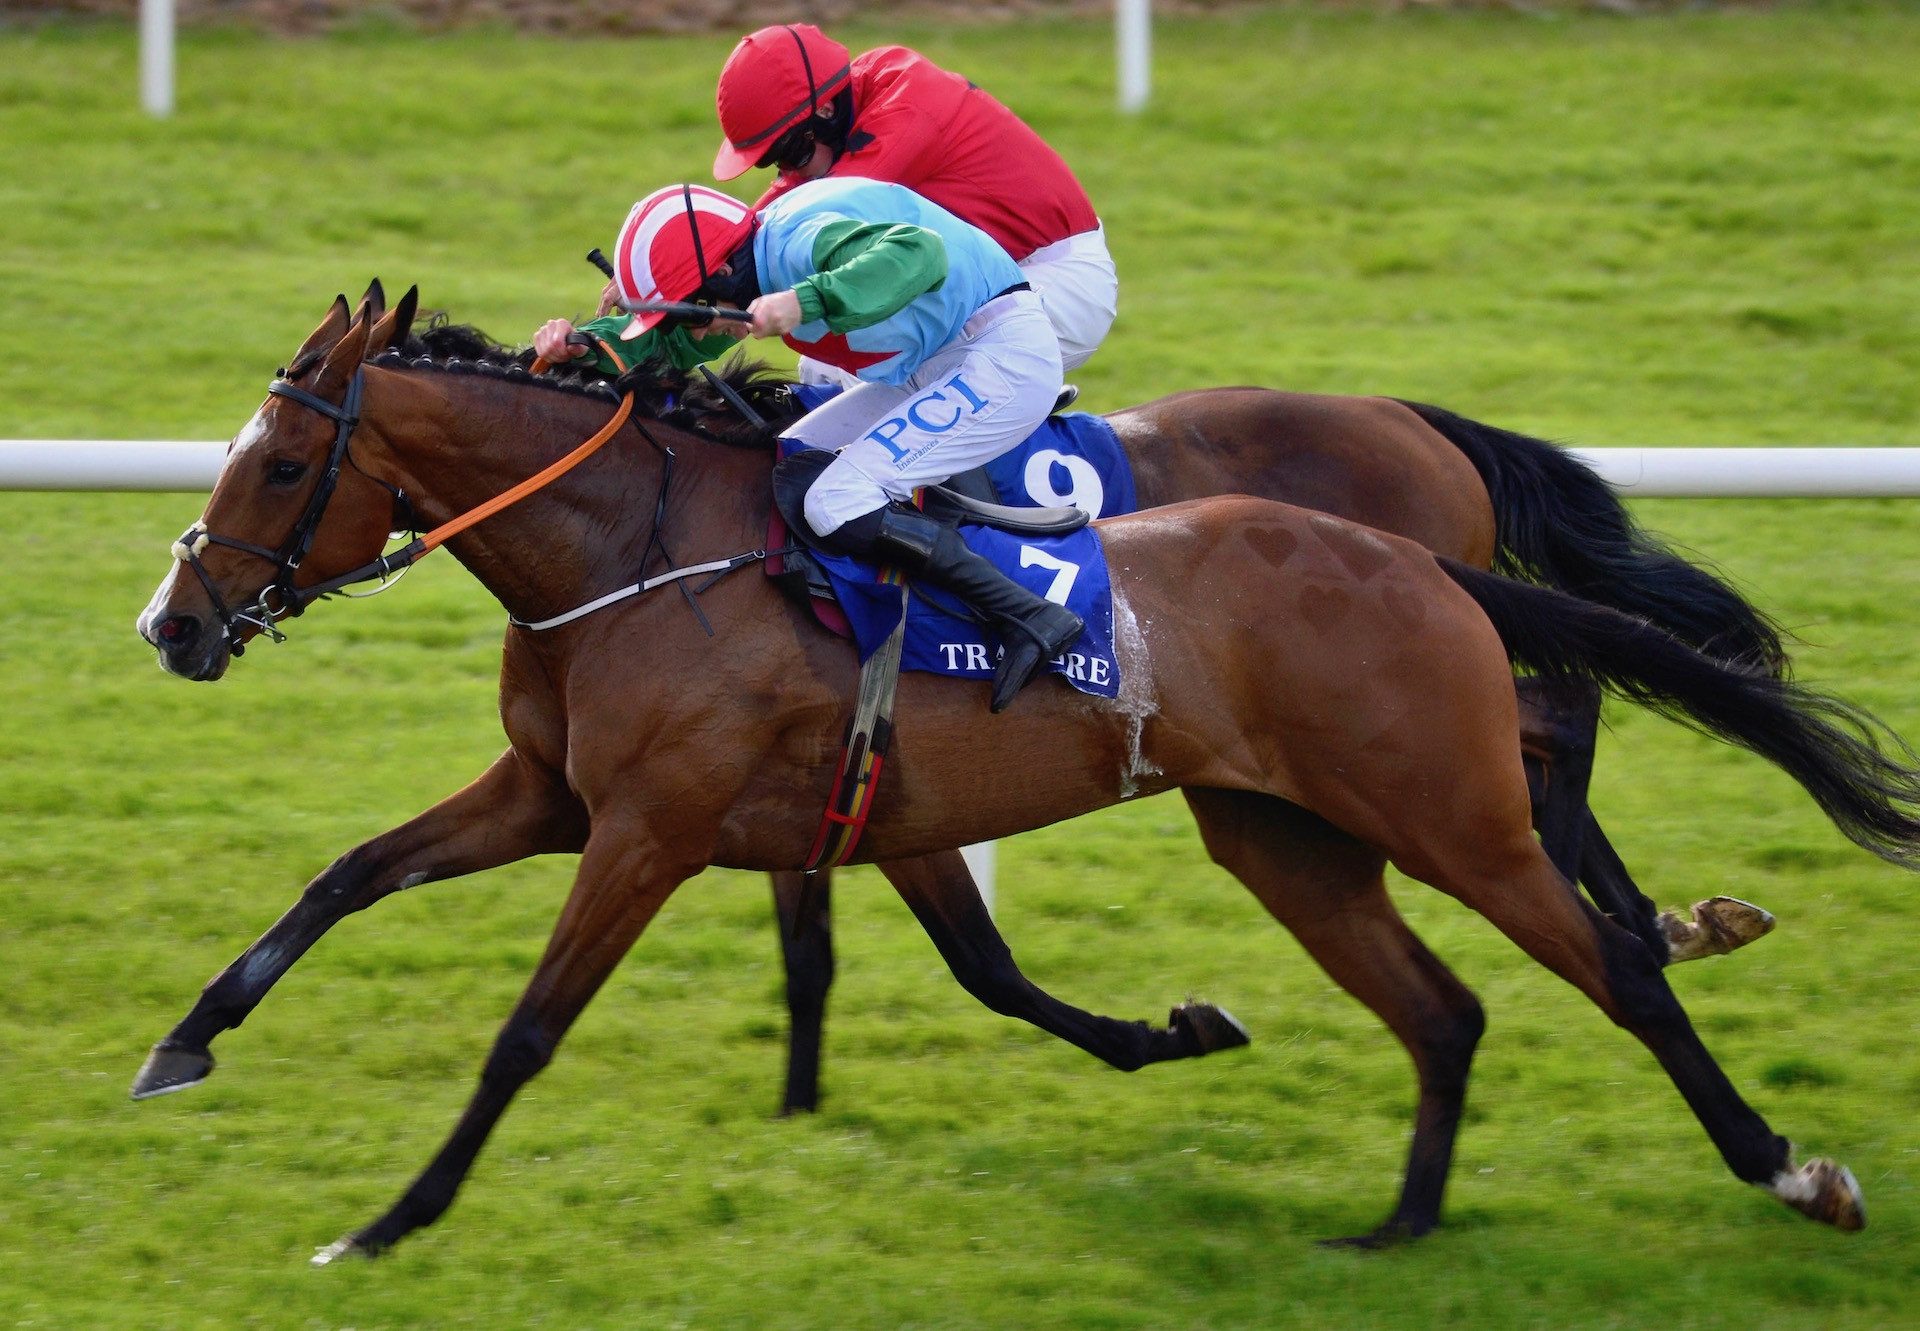 Miss Tempo (Milan) Wins The Mares Maiden Hurdle At Tramore